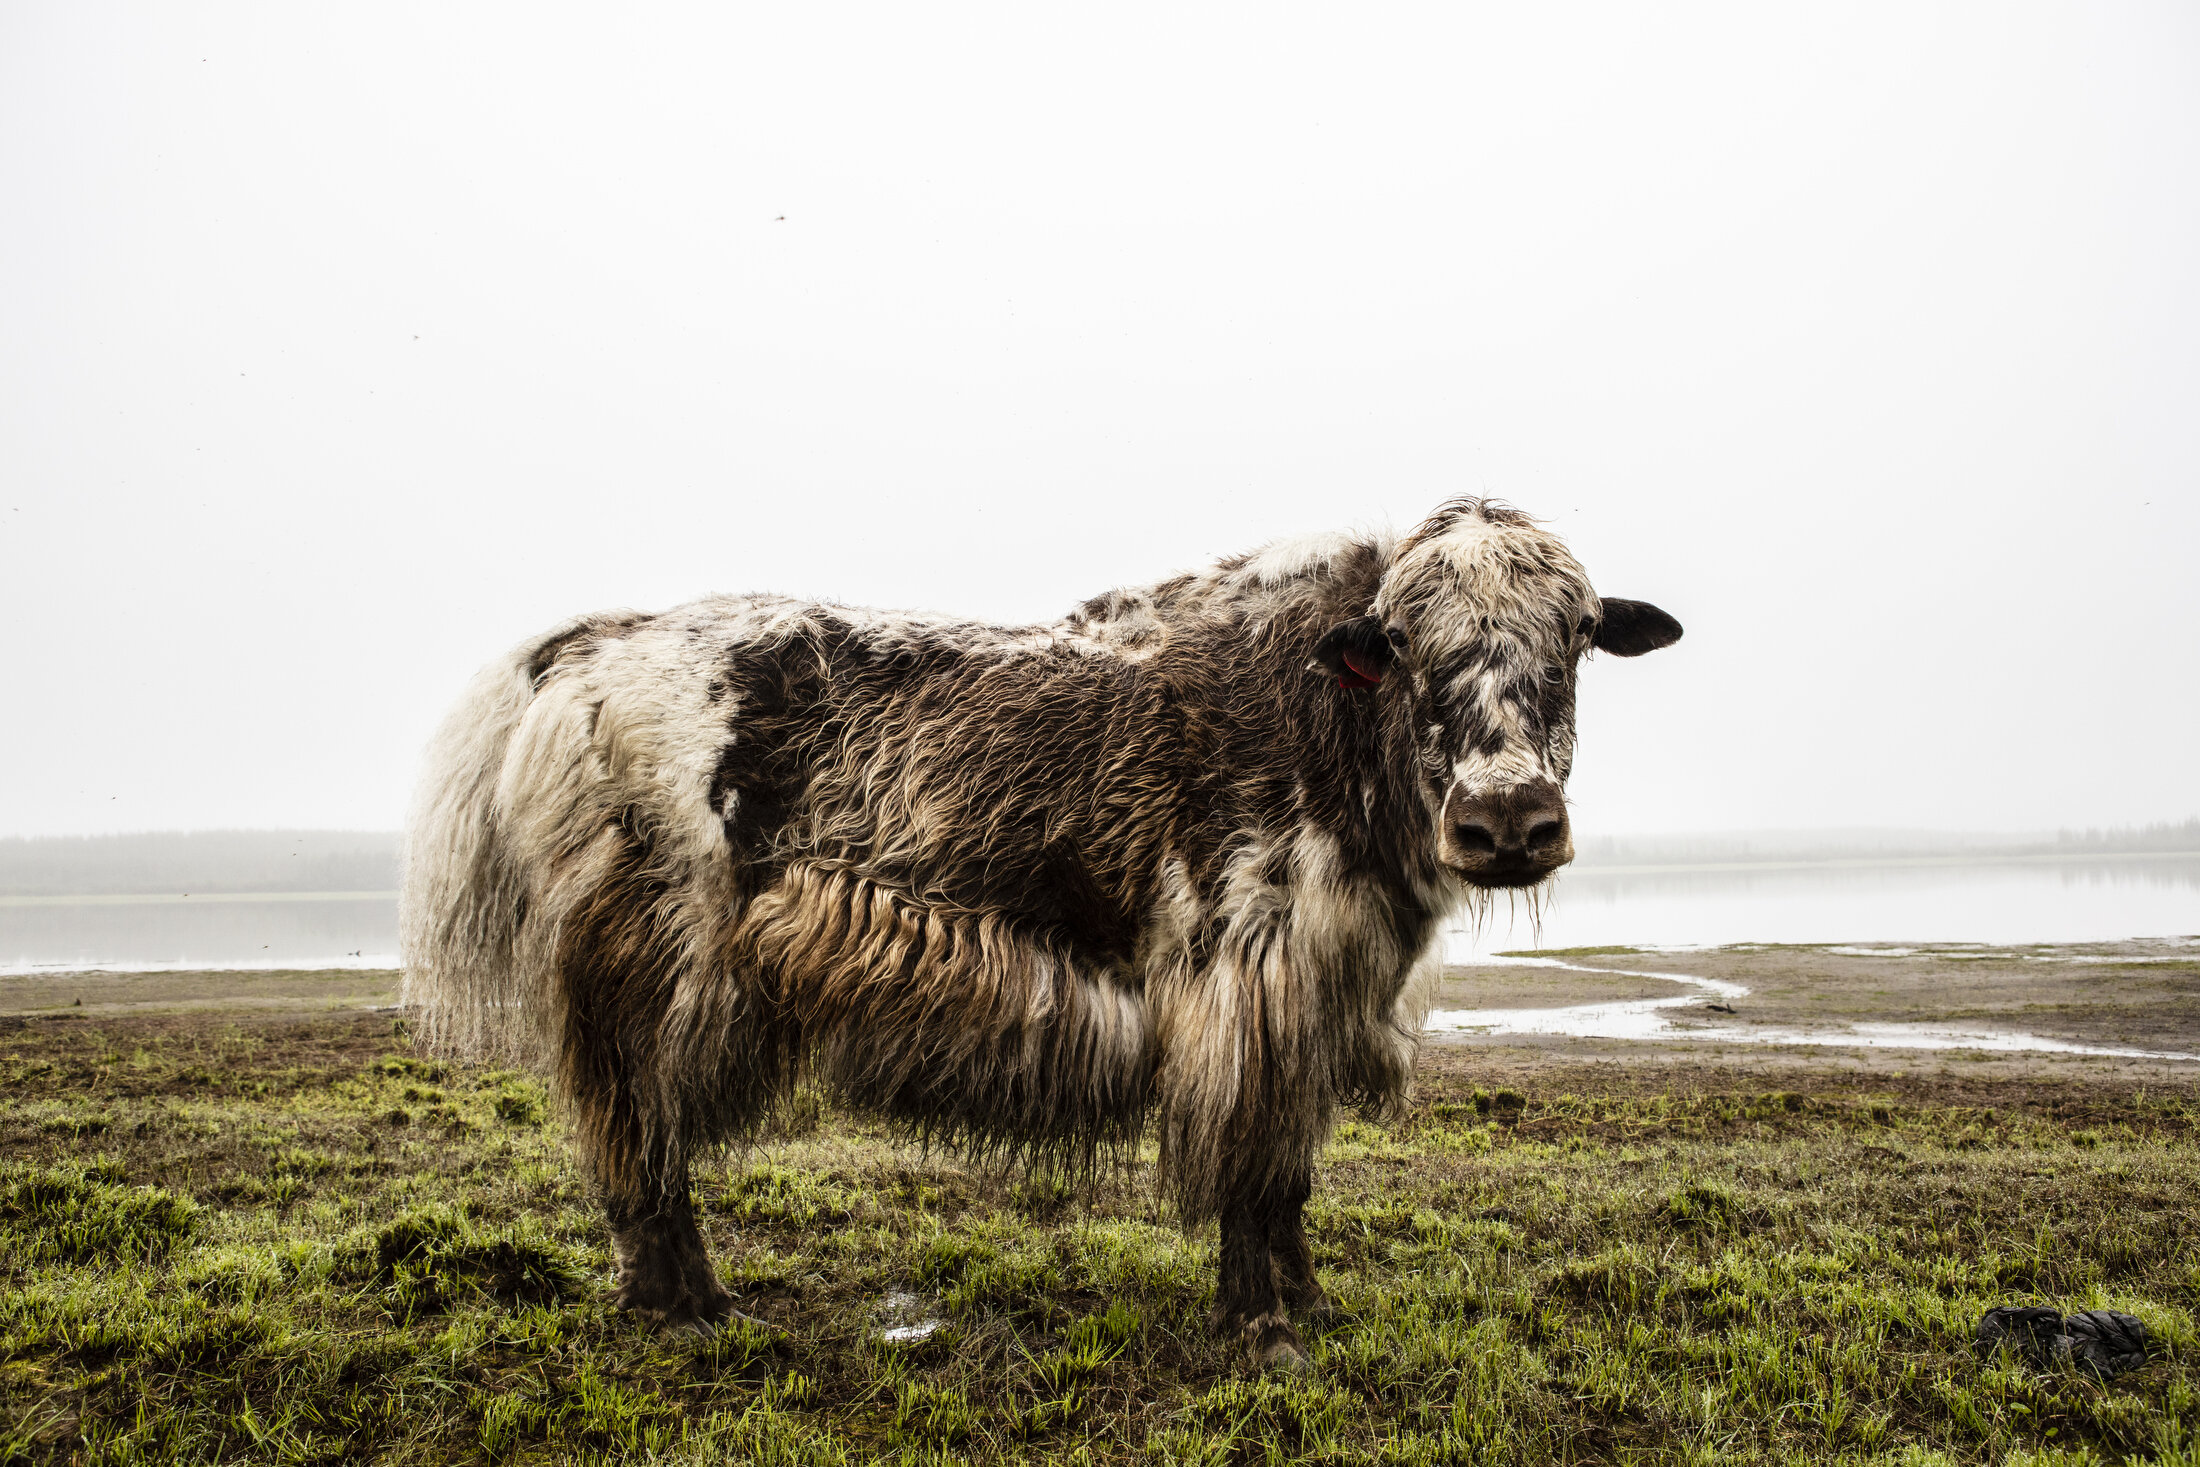  Yak by the lake. More than a dozen yaks currently roam around Pleistocene Park outside of Cherskiy, Siberia. Pleistocene Park, a nature reserve and research station along the Kolyma river in the northeast of Siberia, is also a large-scale scientific